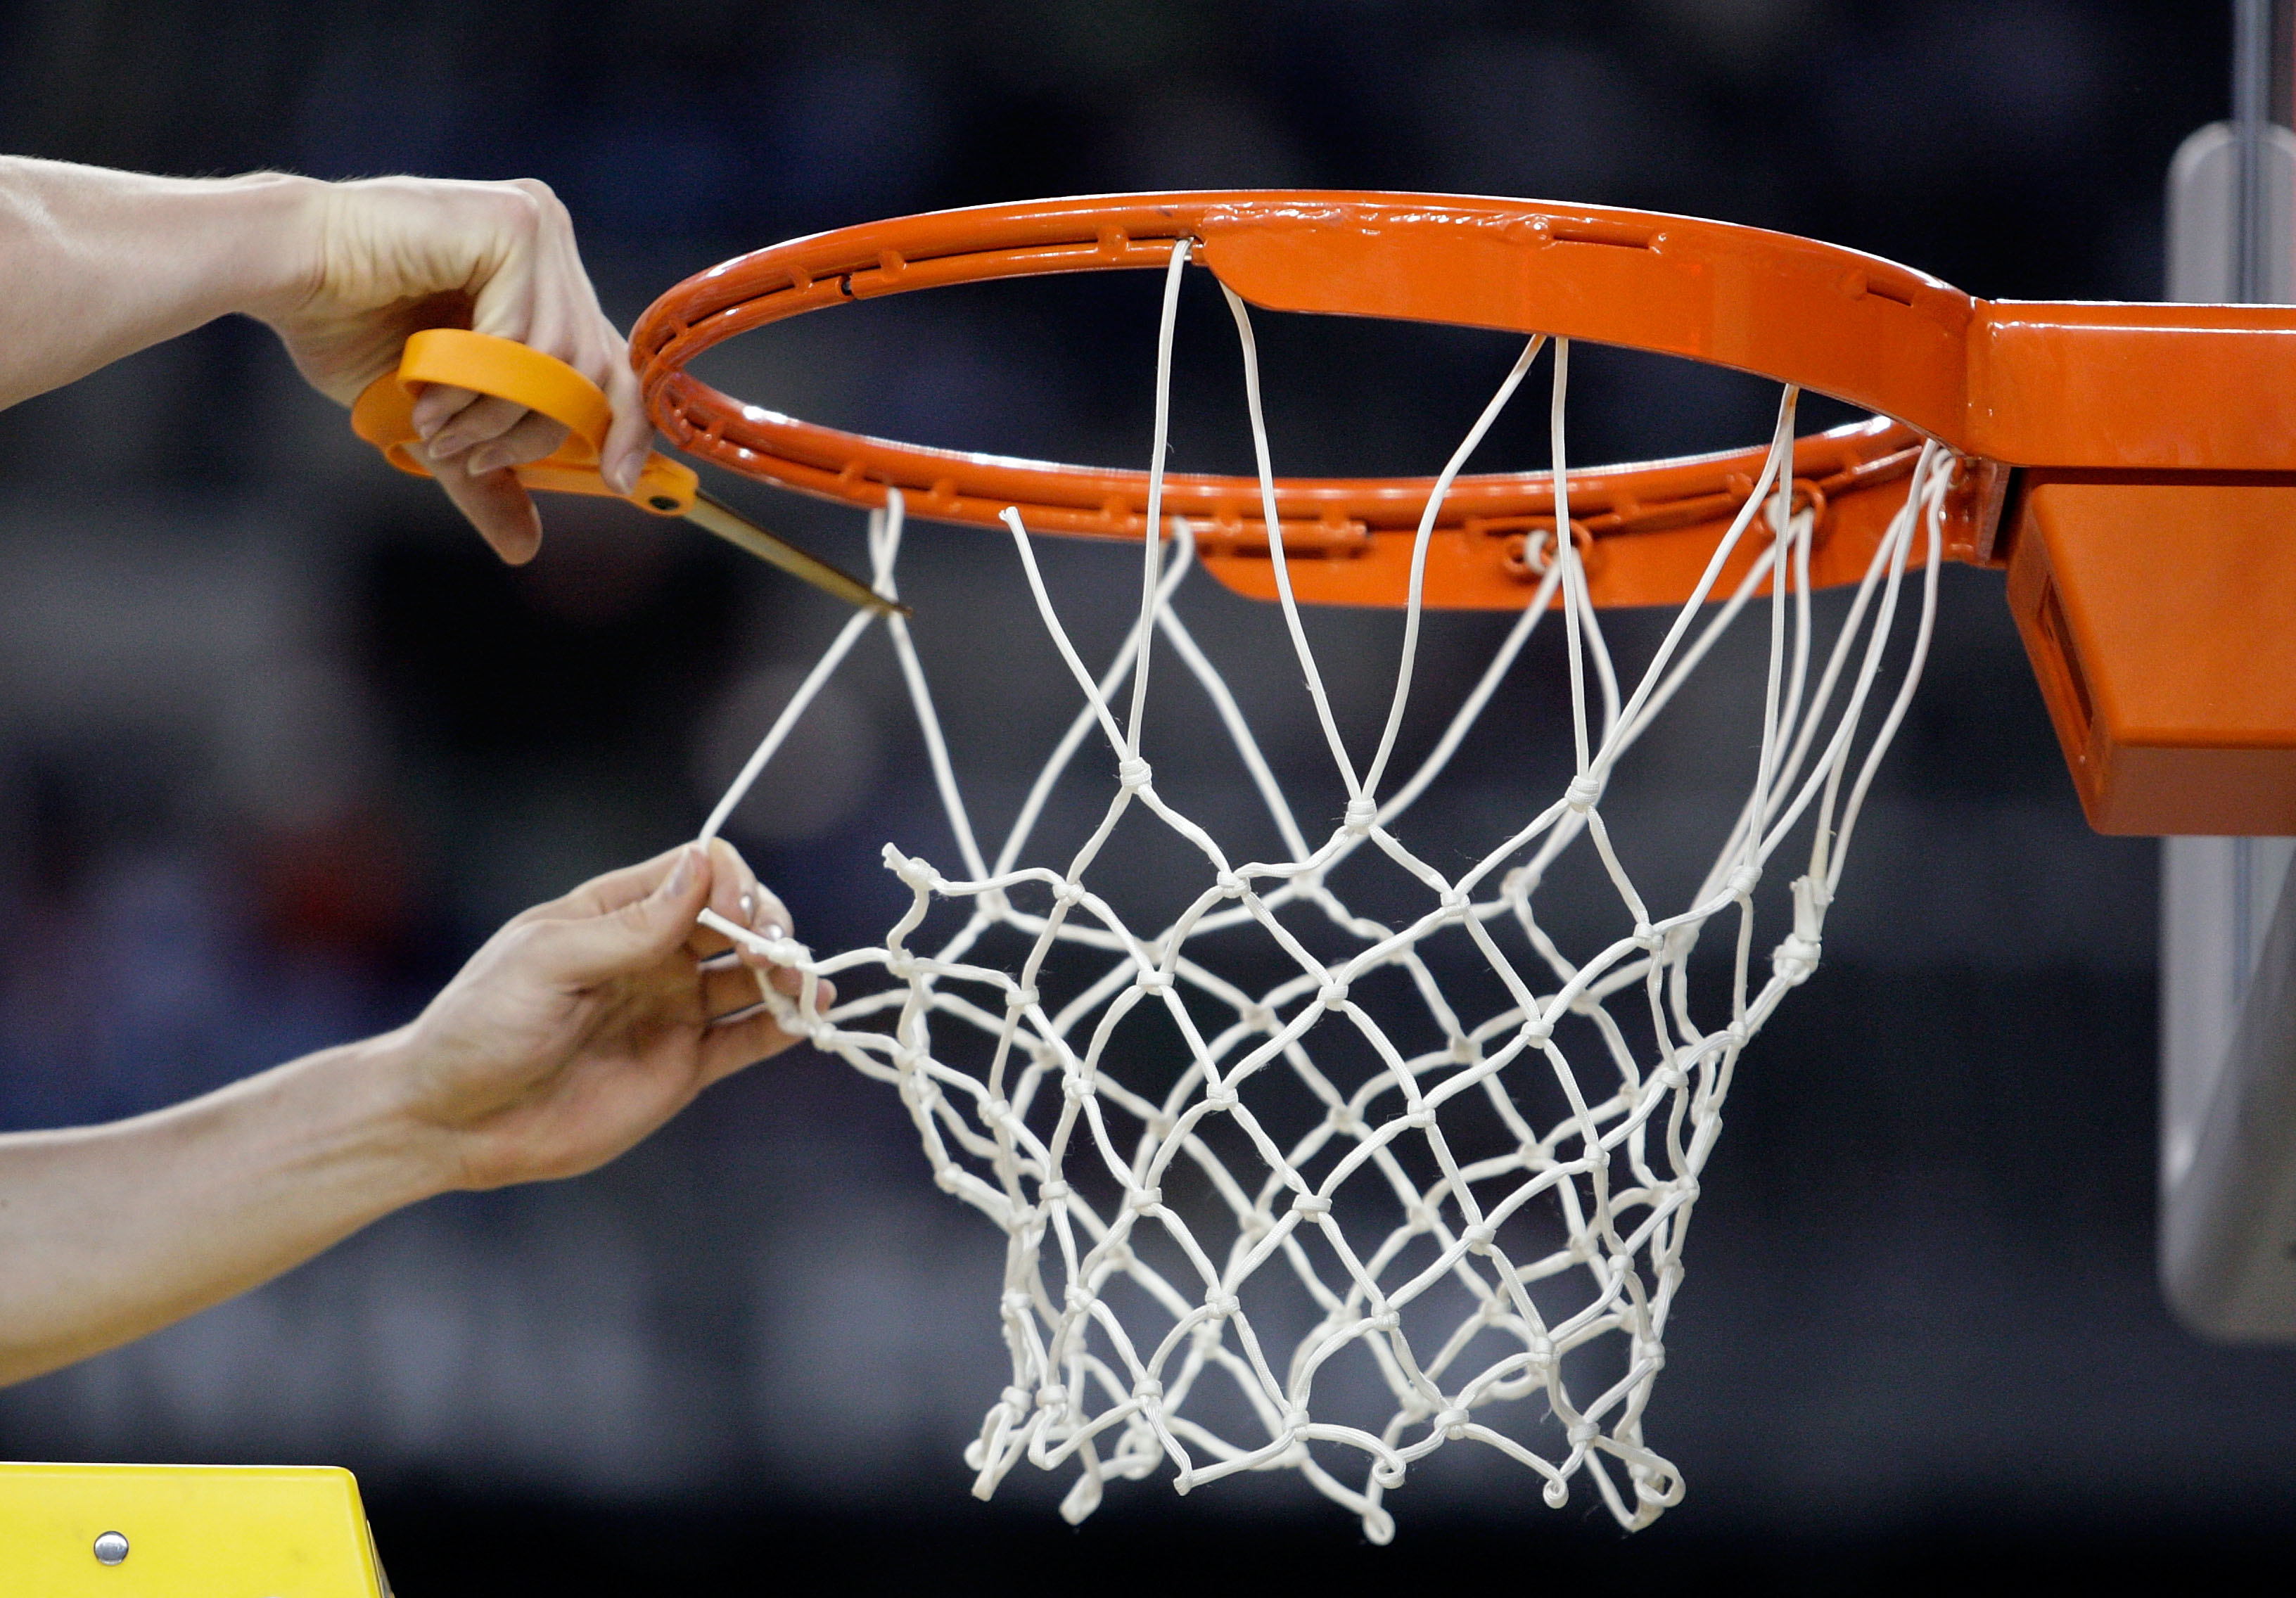 March Madness, other college sports canceled amid coronavirus concerns